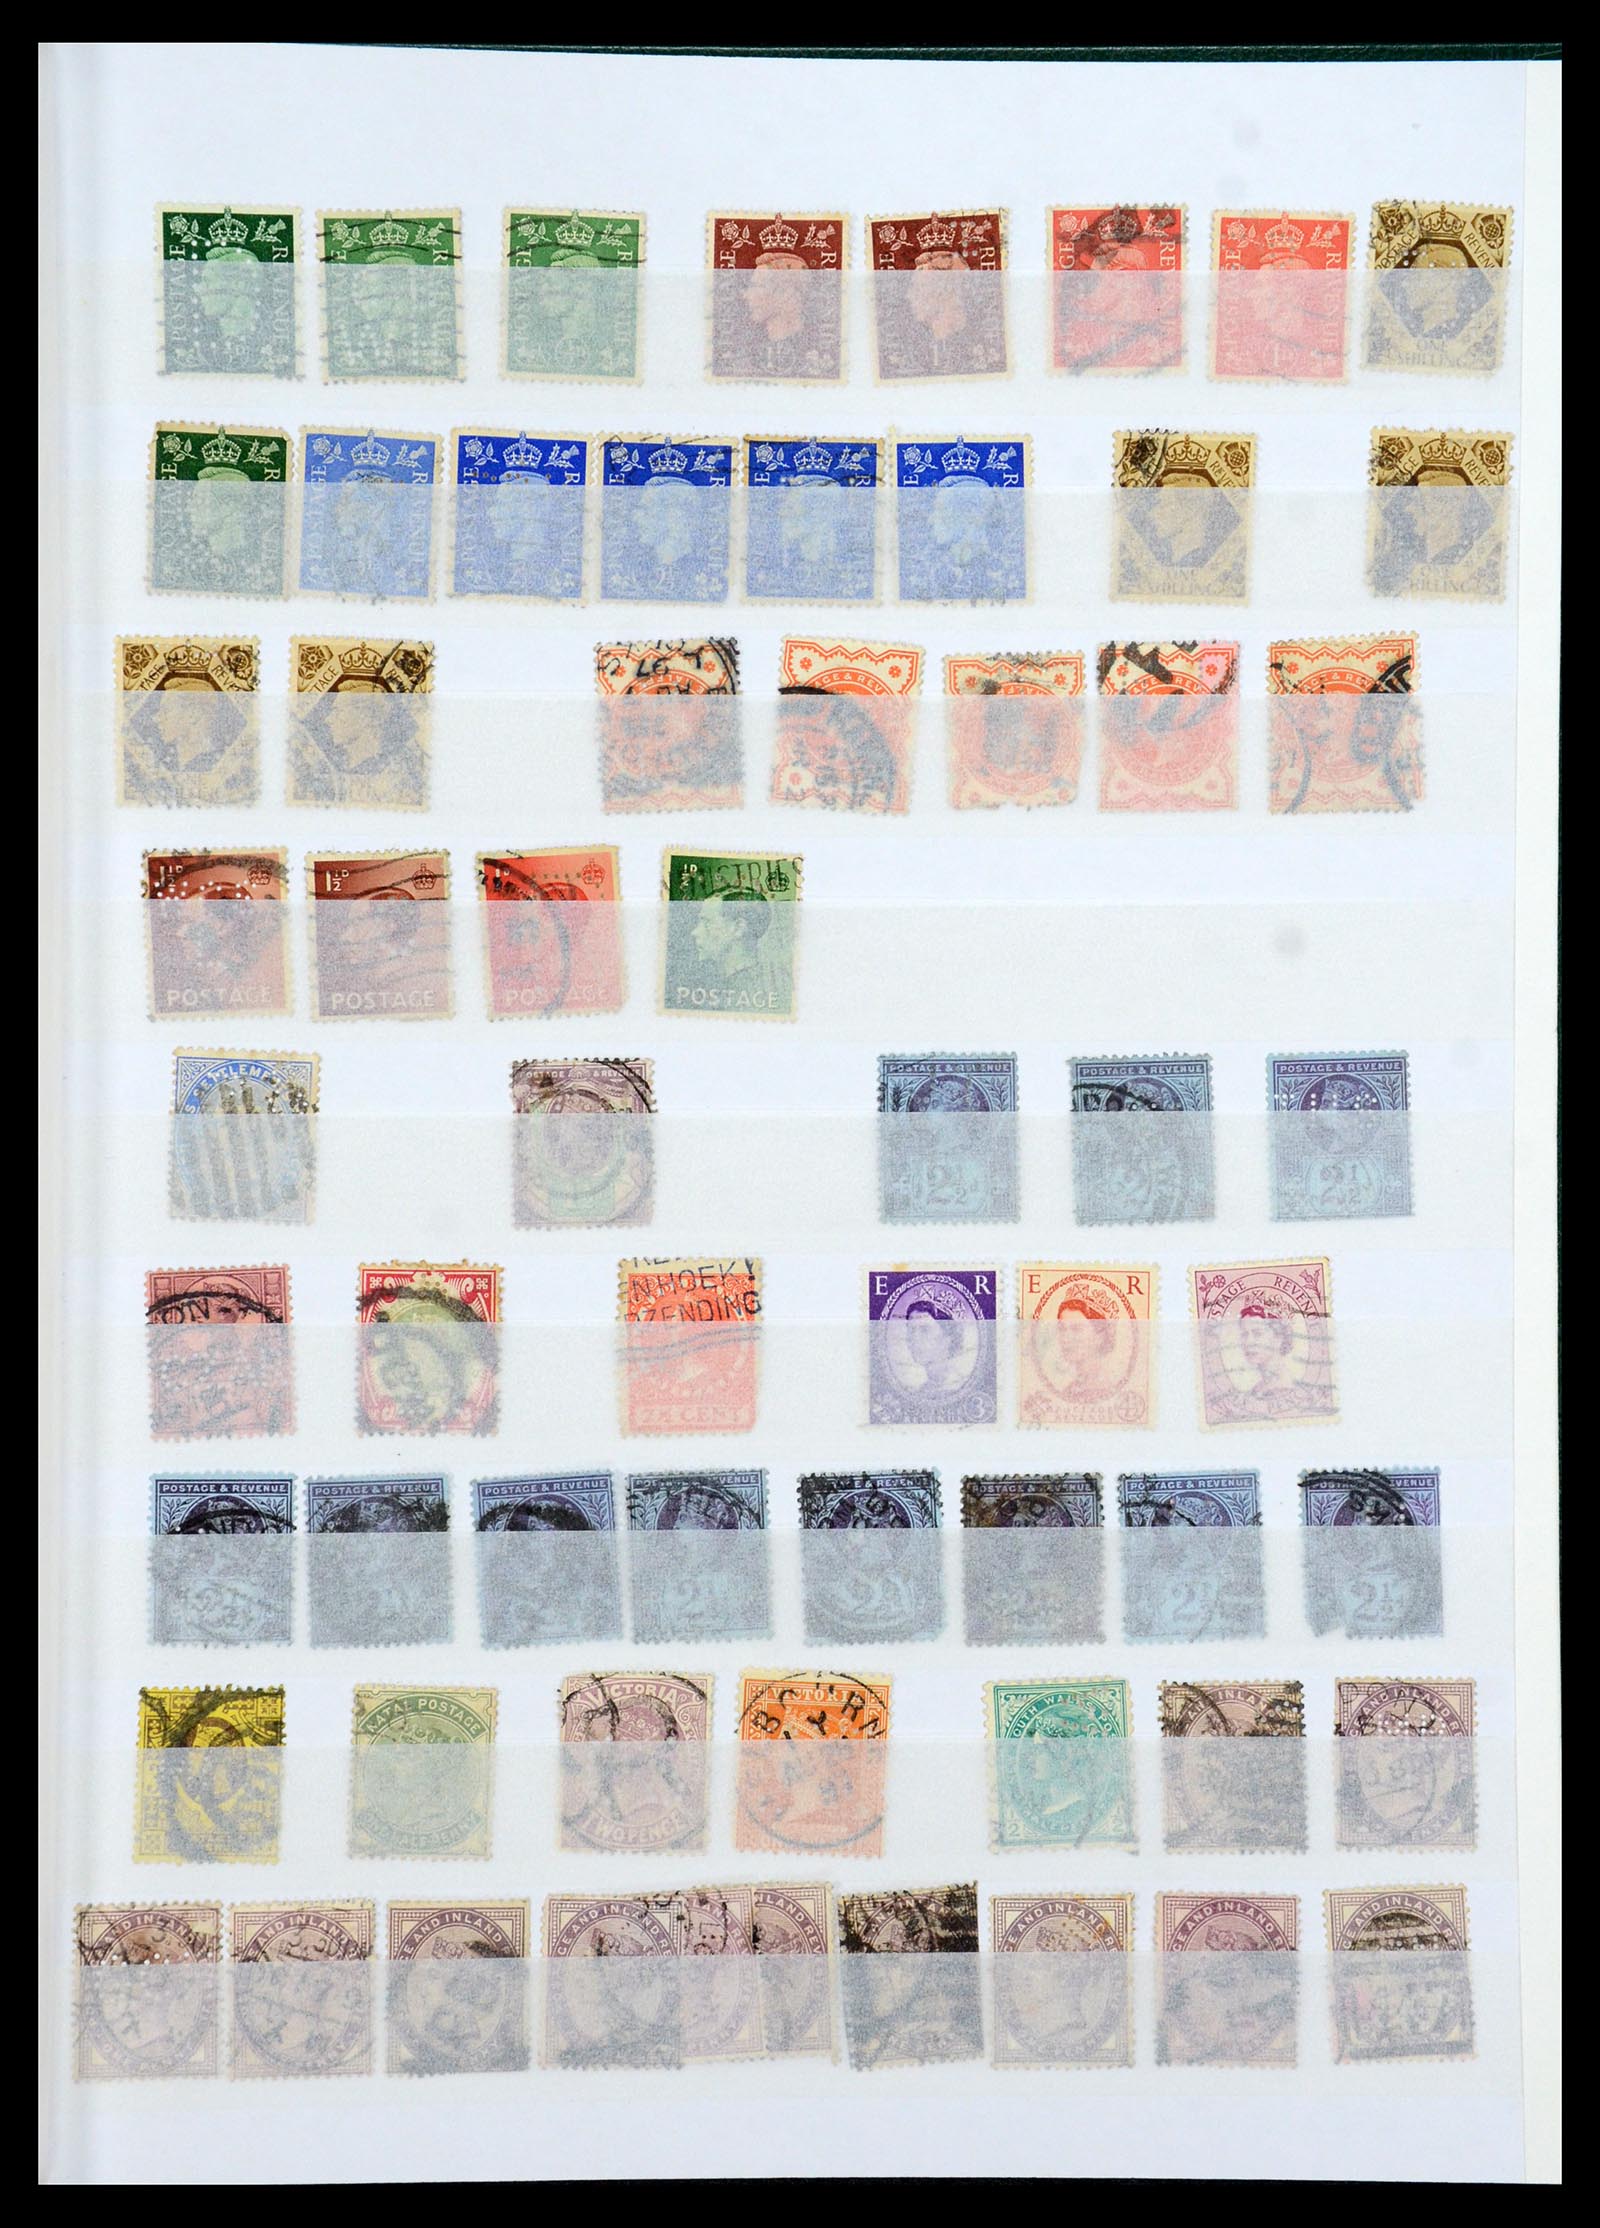 36111 065 - Stamp collection 36111 France perfins 1880-1950.